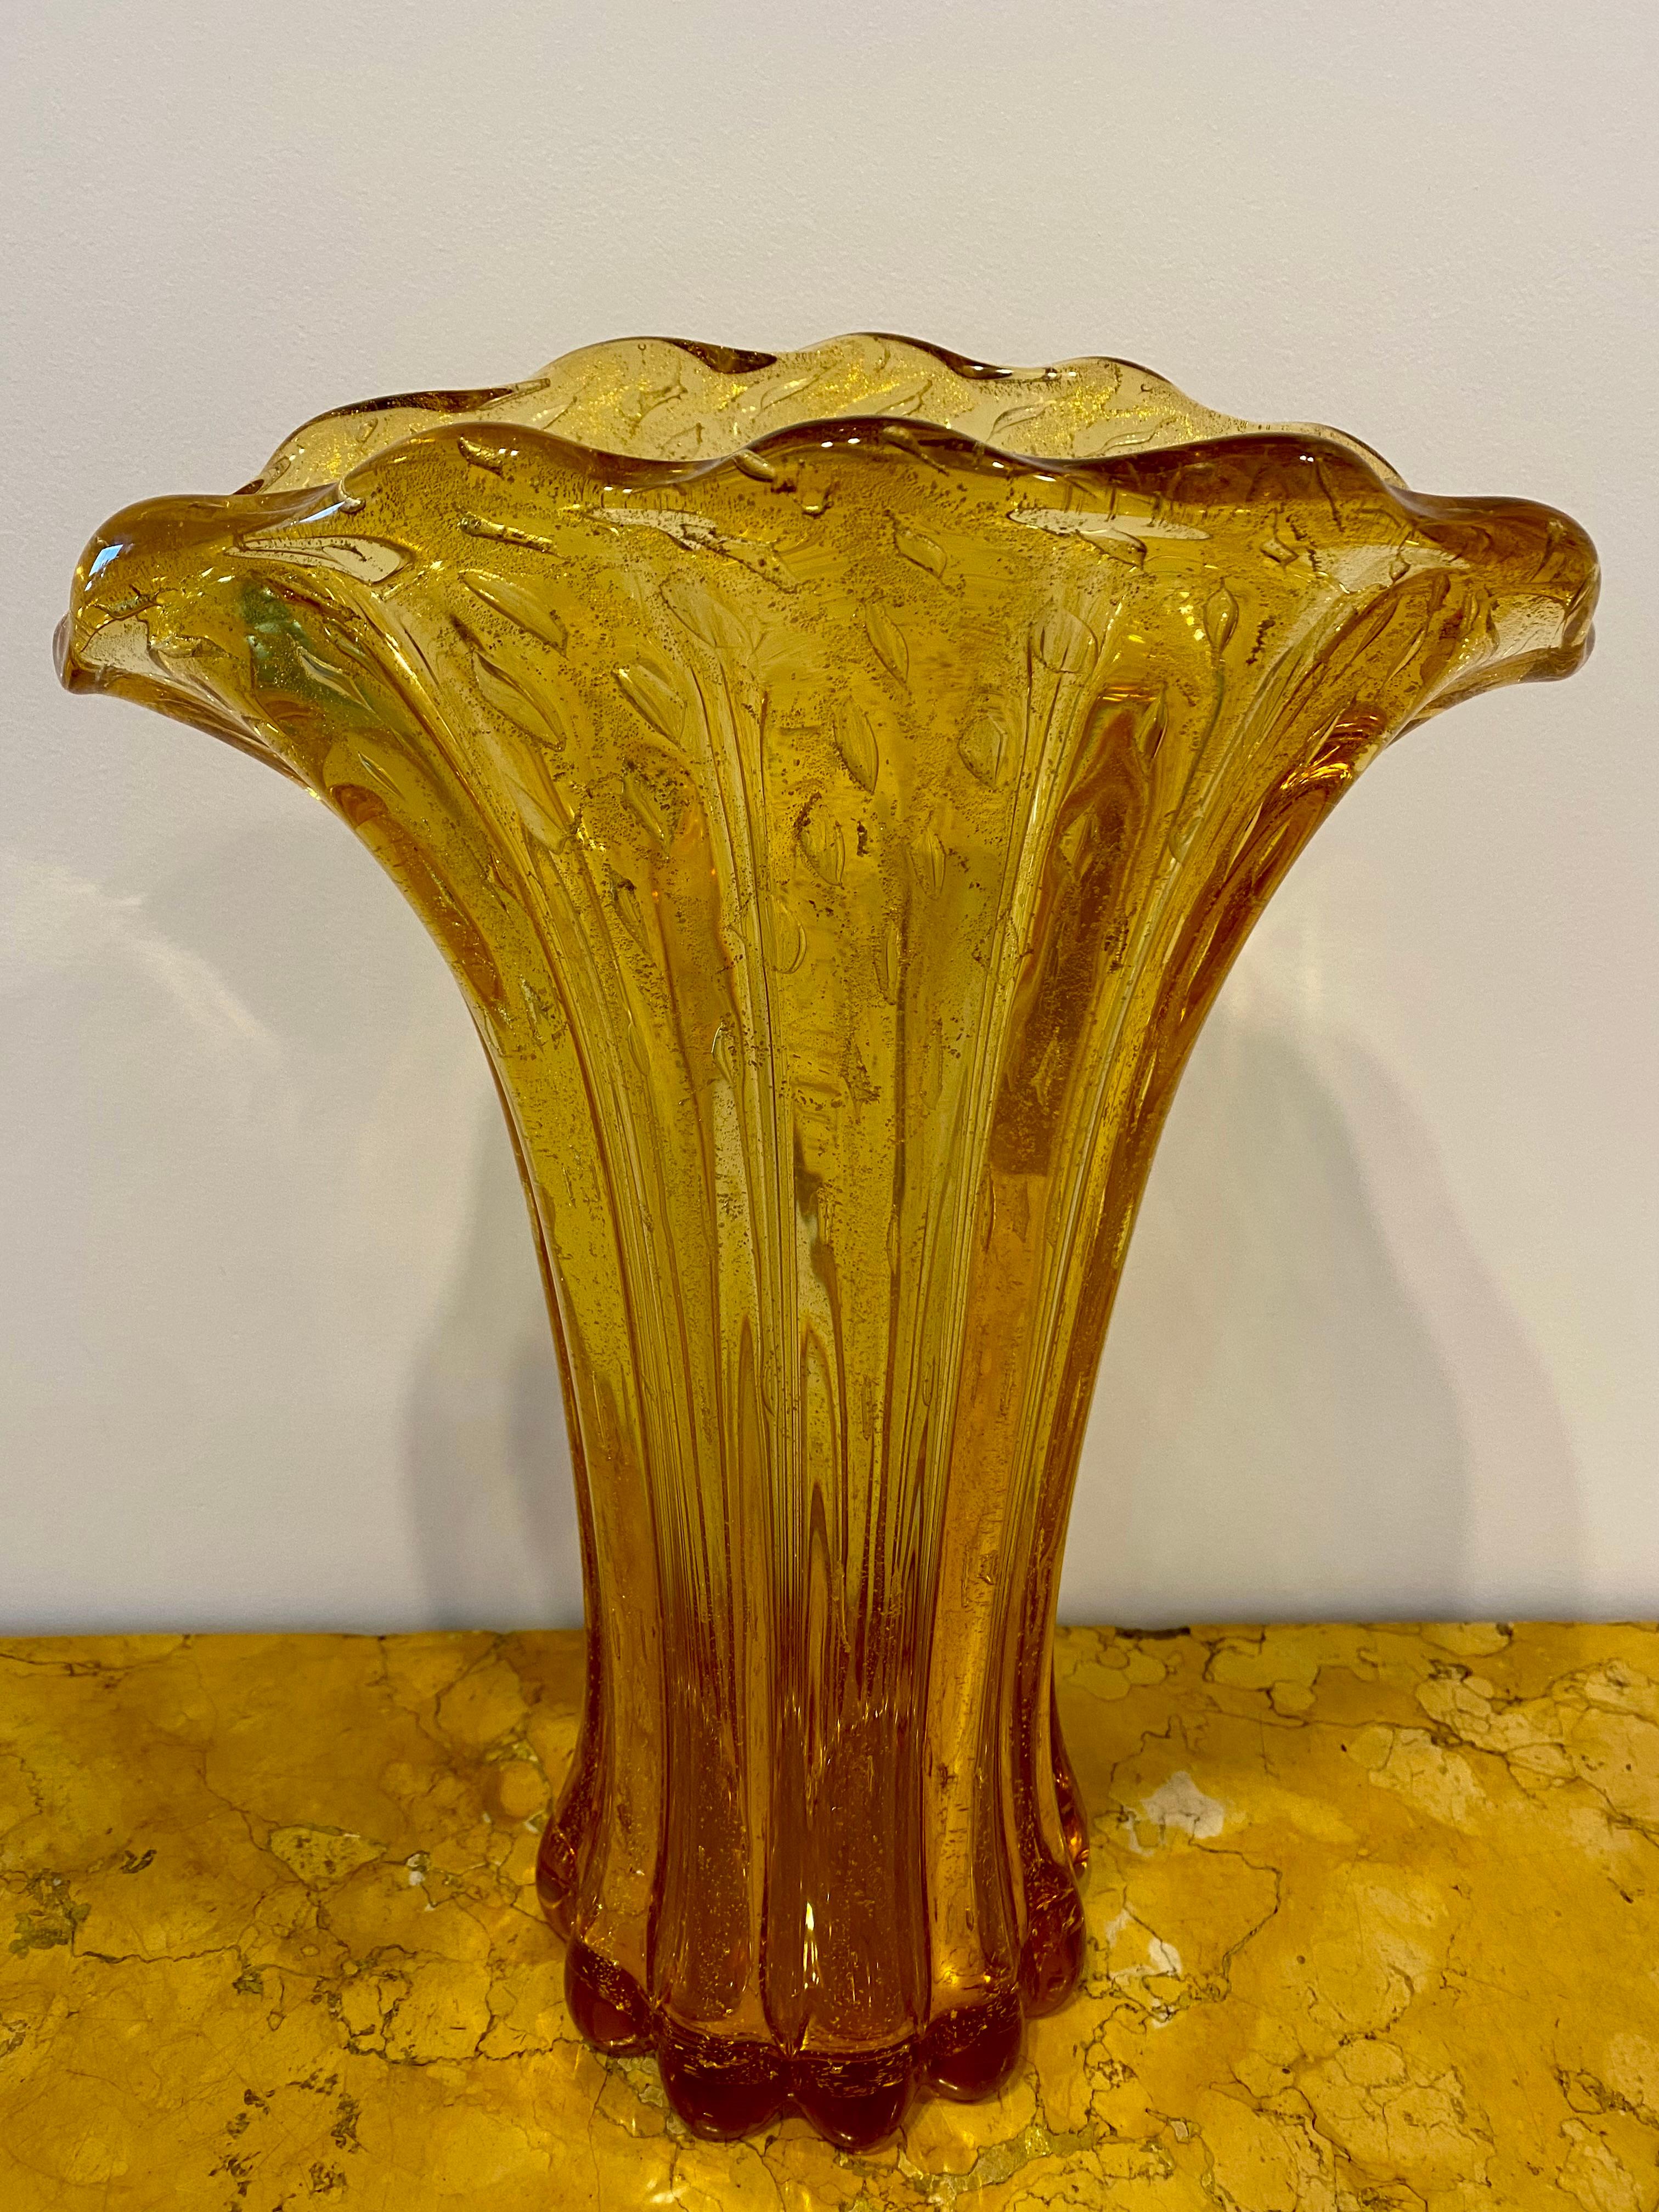 Italian Large Murano Sommerso vase, Signed Simone Mian, Circa 1980

This Italian Murano Sommerso vase with a wavy top fan shape, and long convex lines rounded up to a scalloped base is amber in color with golden spangles and controlled air